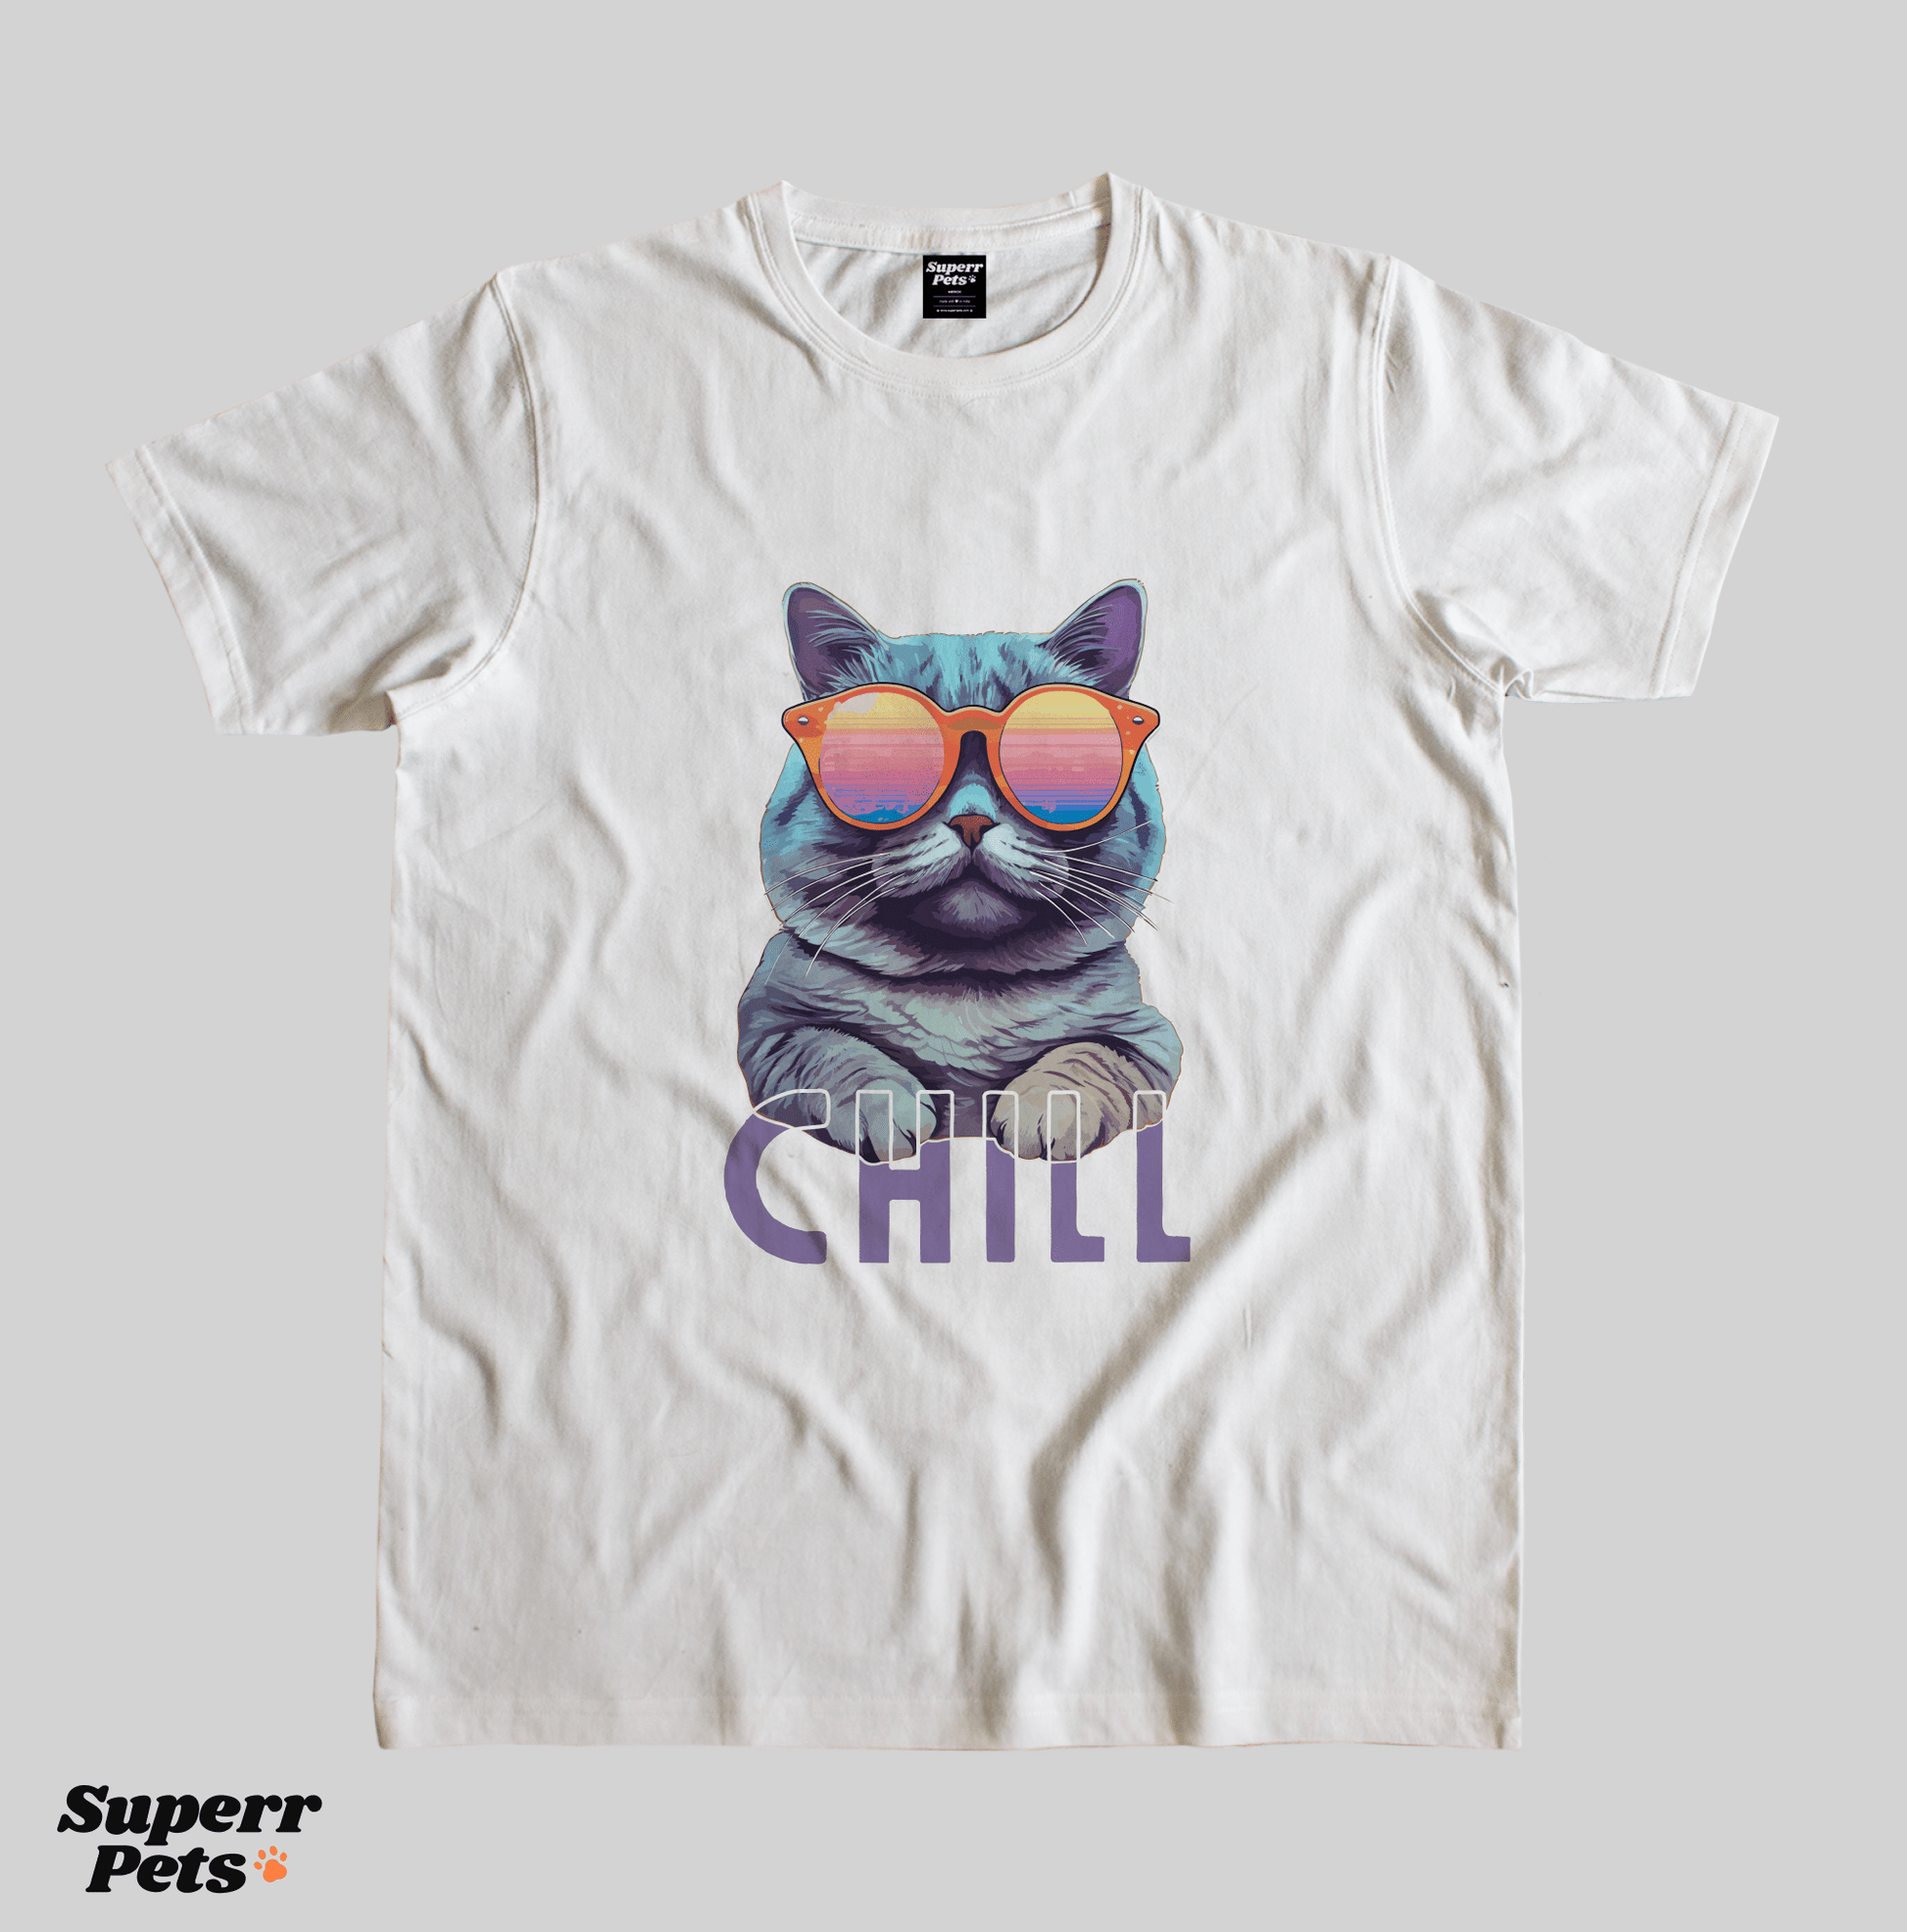 Superr Pets Casual T-Shirt Casual T-Shirt / White / S Chill | Casual T-Shirt